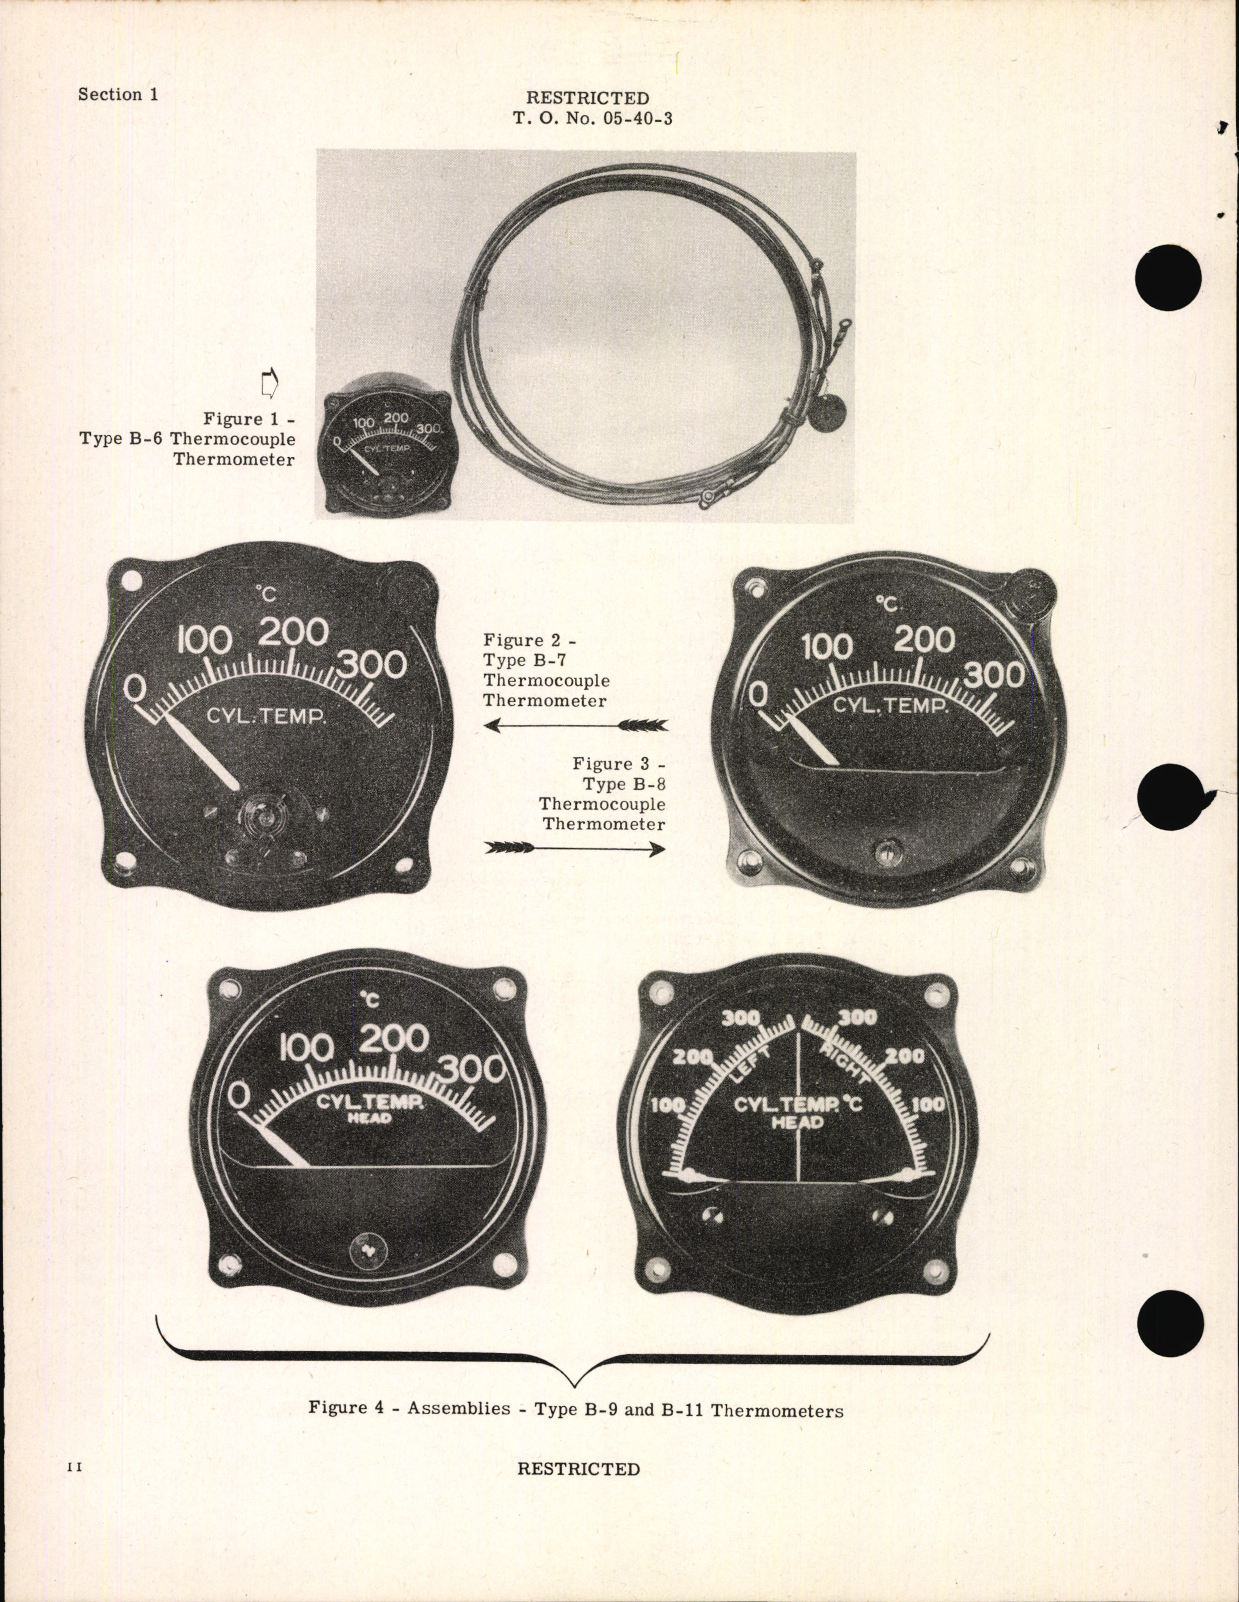 Sample page 6 from AirCorps Library document: Handbook of Instructions with Parts Catalog for Thermocouple Thermometers